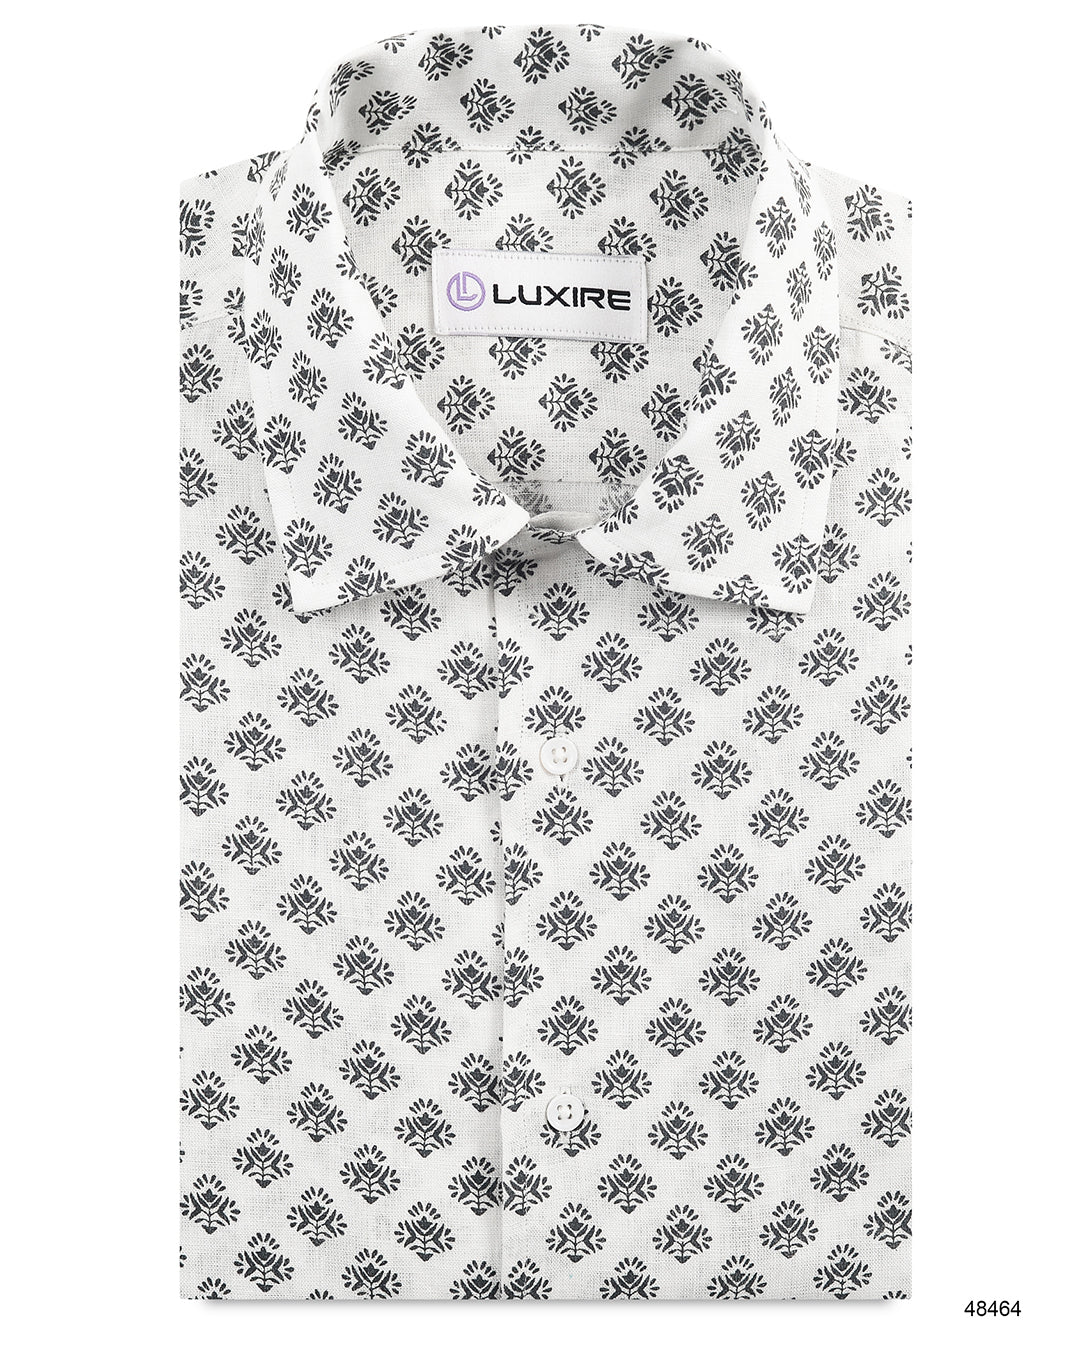 Front view of custom linen shirt for men by Luxire in black flower print